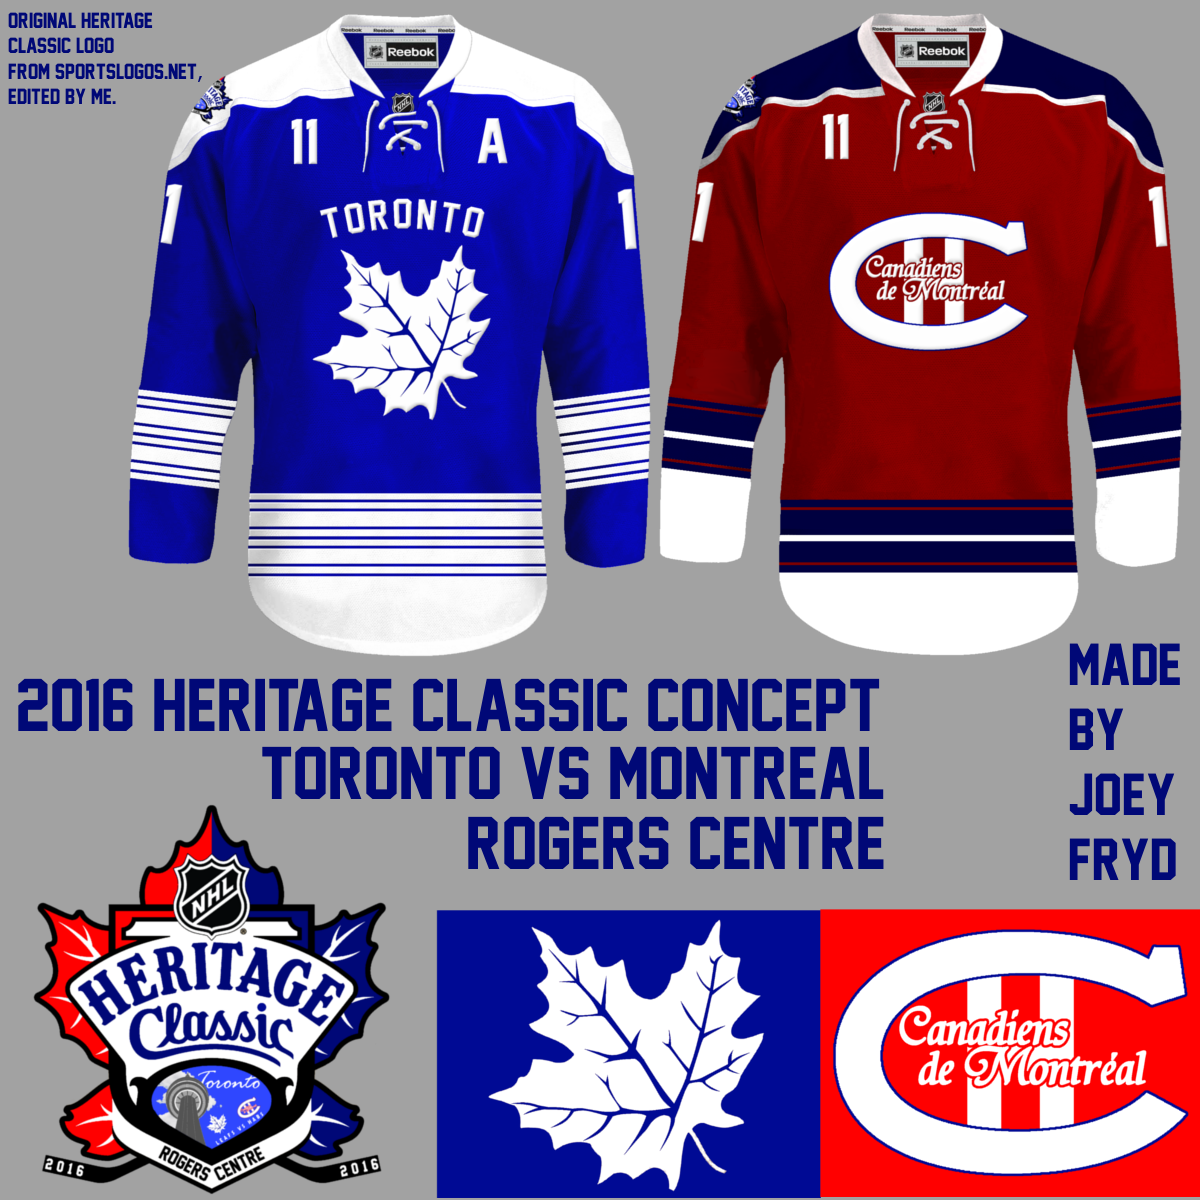 The Heritage Classic Jersey has already been finalized. Here's